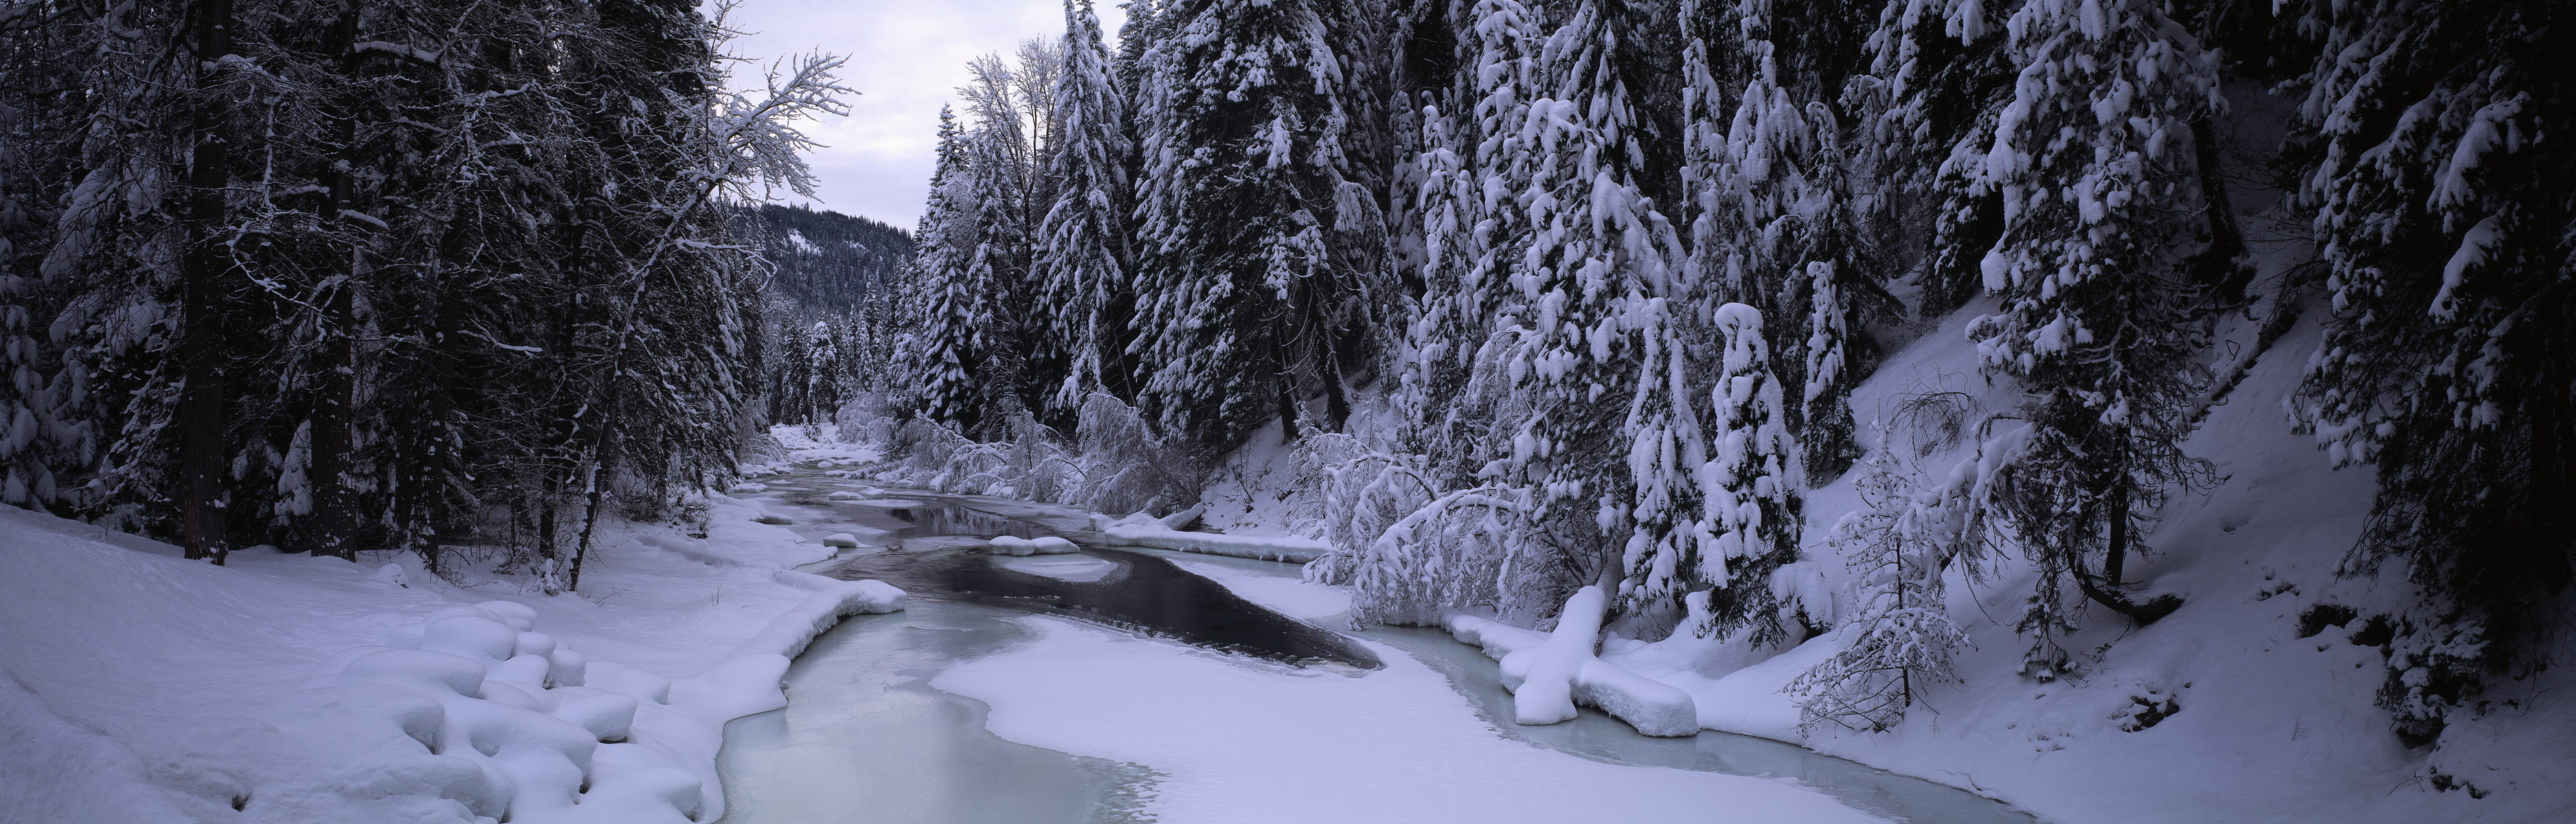 mountains, landscapes, nature, winter, snow, trees, forests, rivers, multiscreen - desktop wallpaper